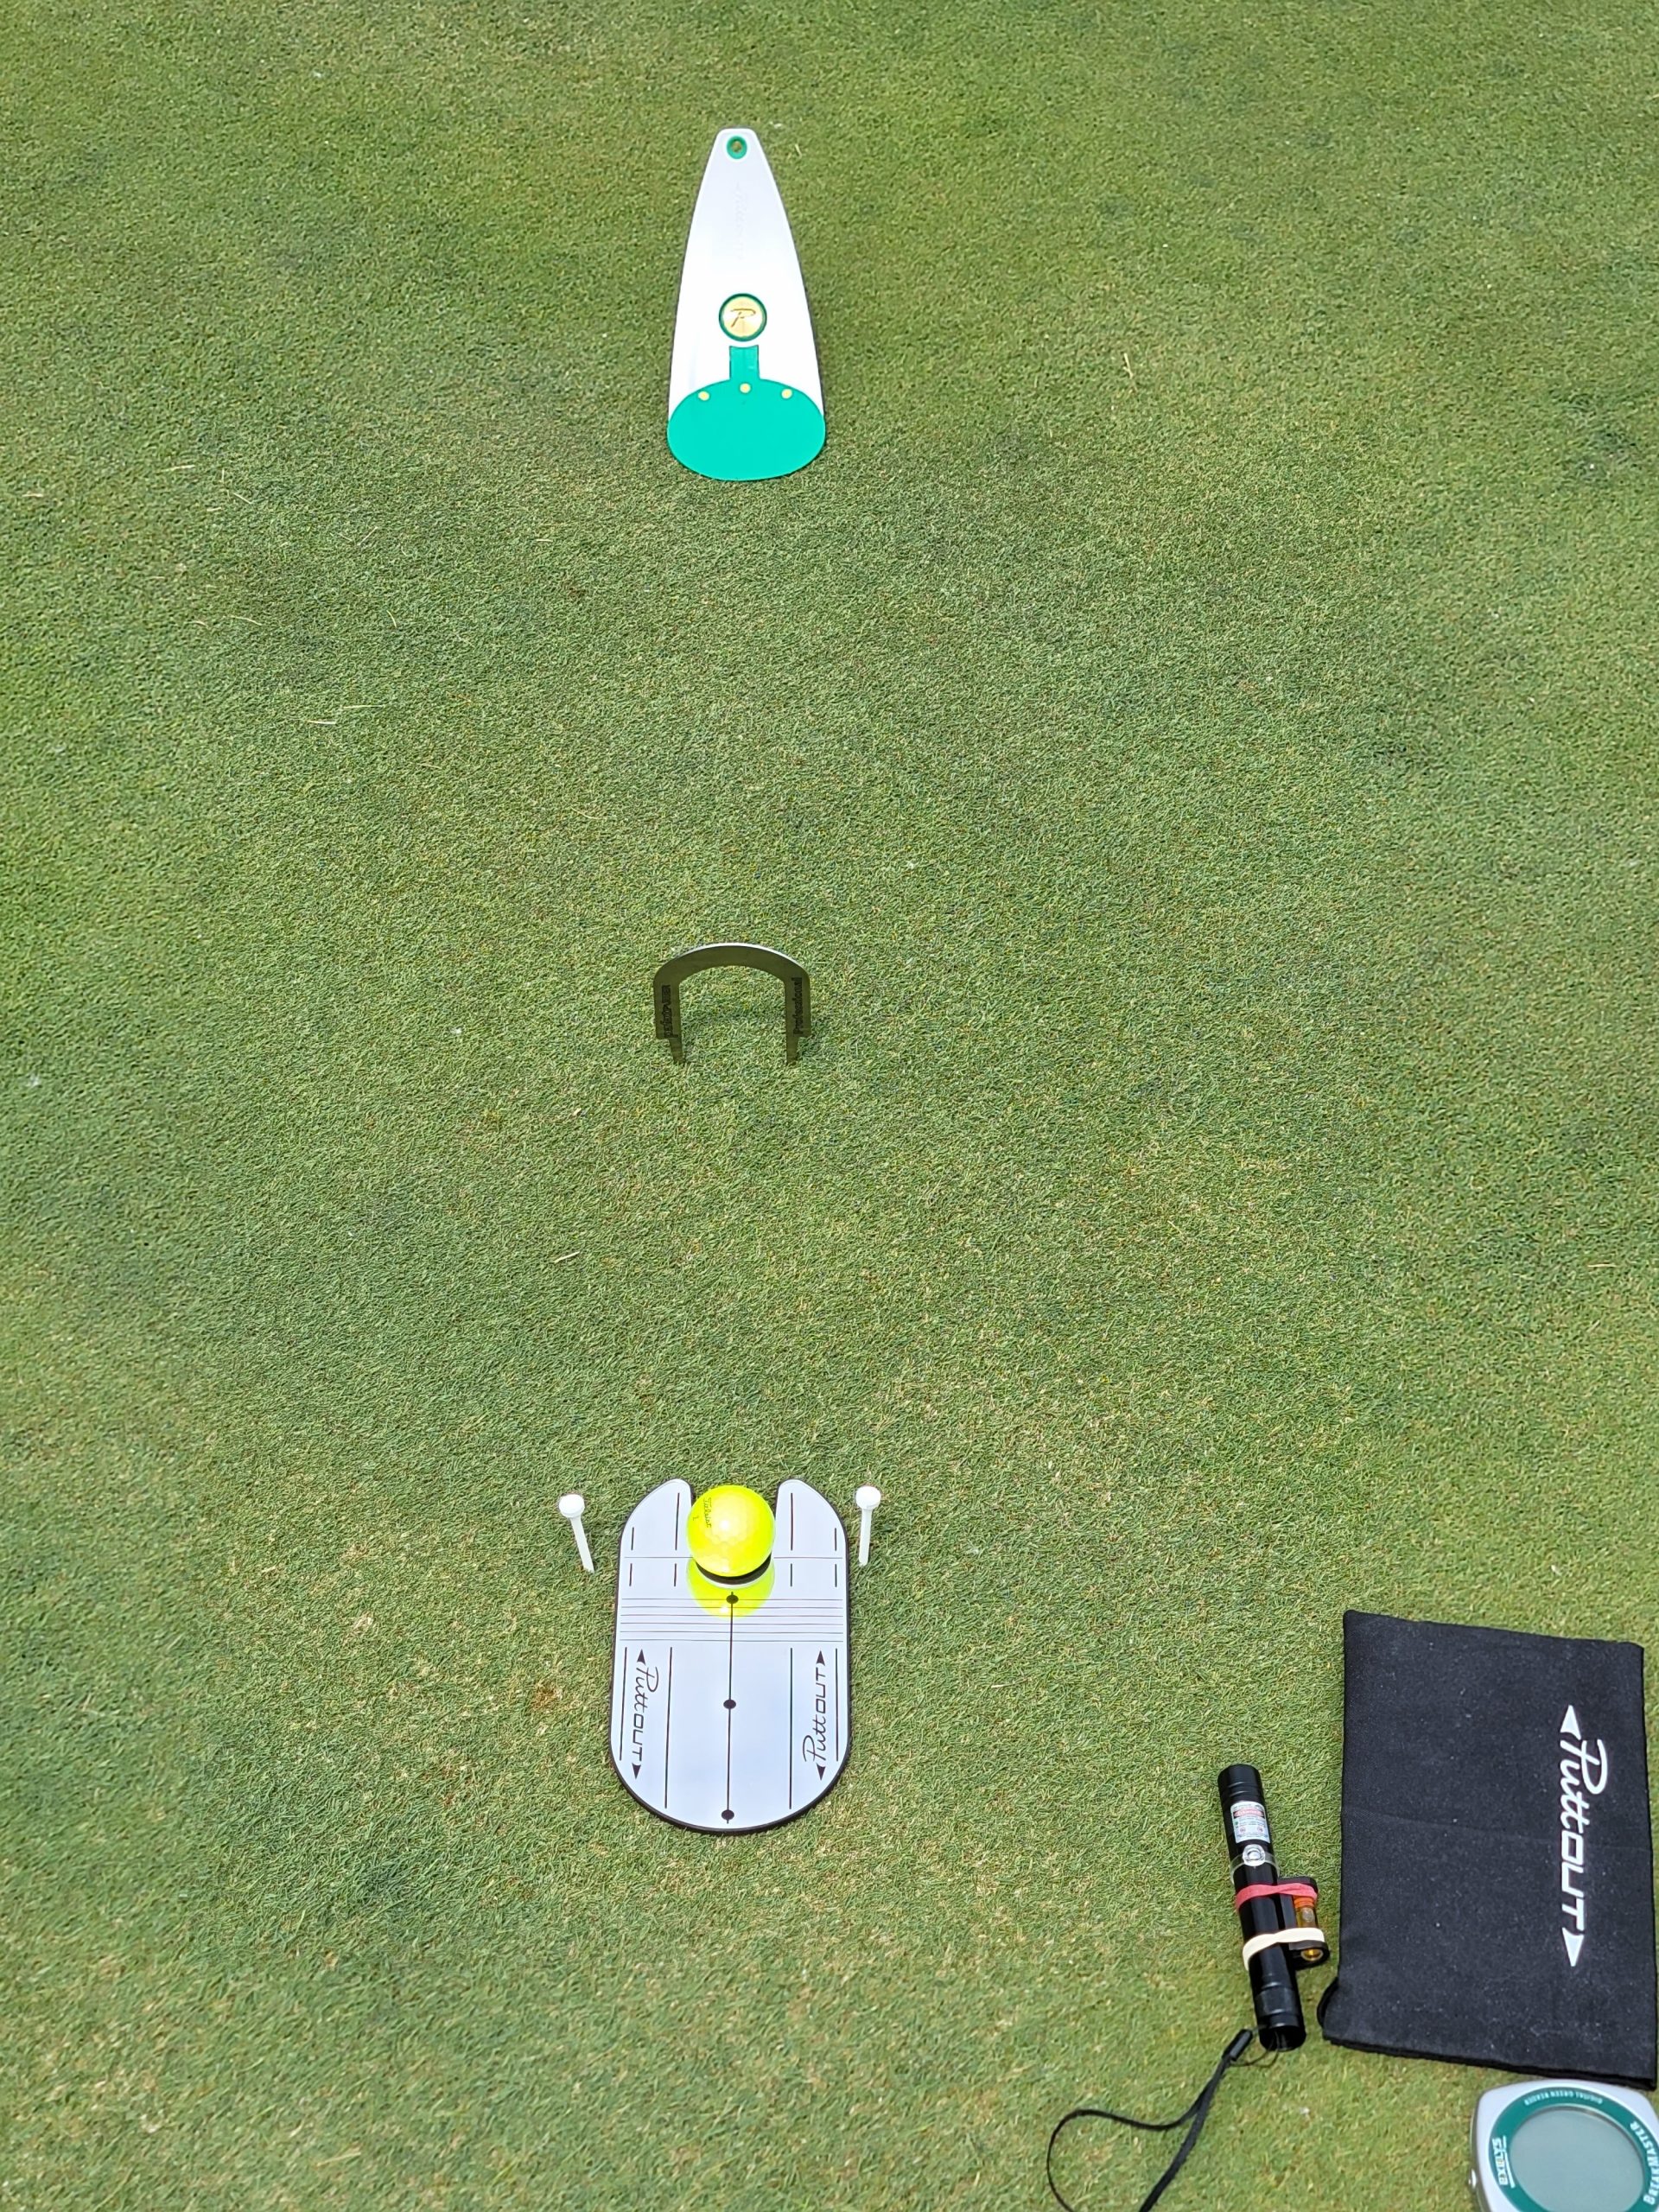 Old Duffer Golf image of a putting gate drill